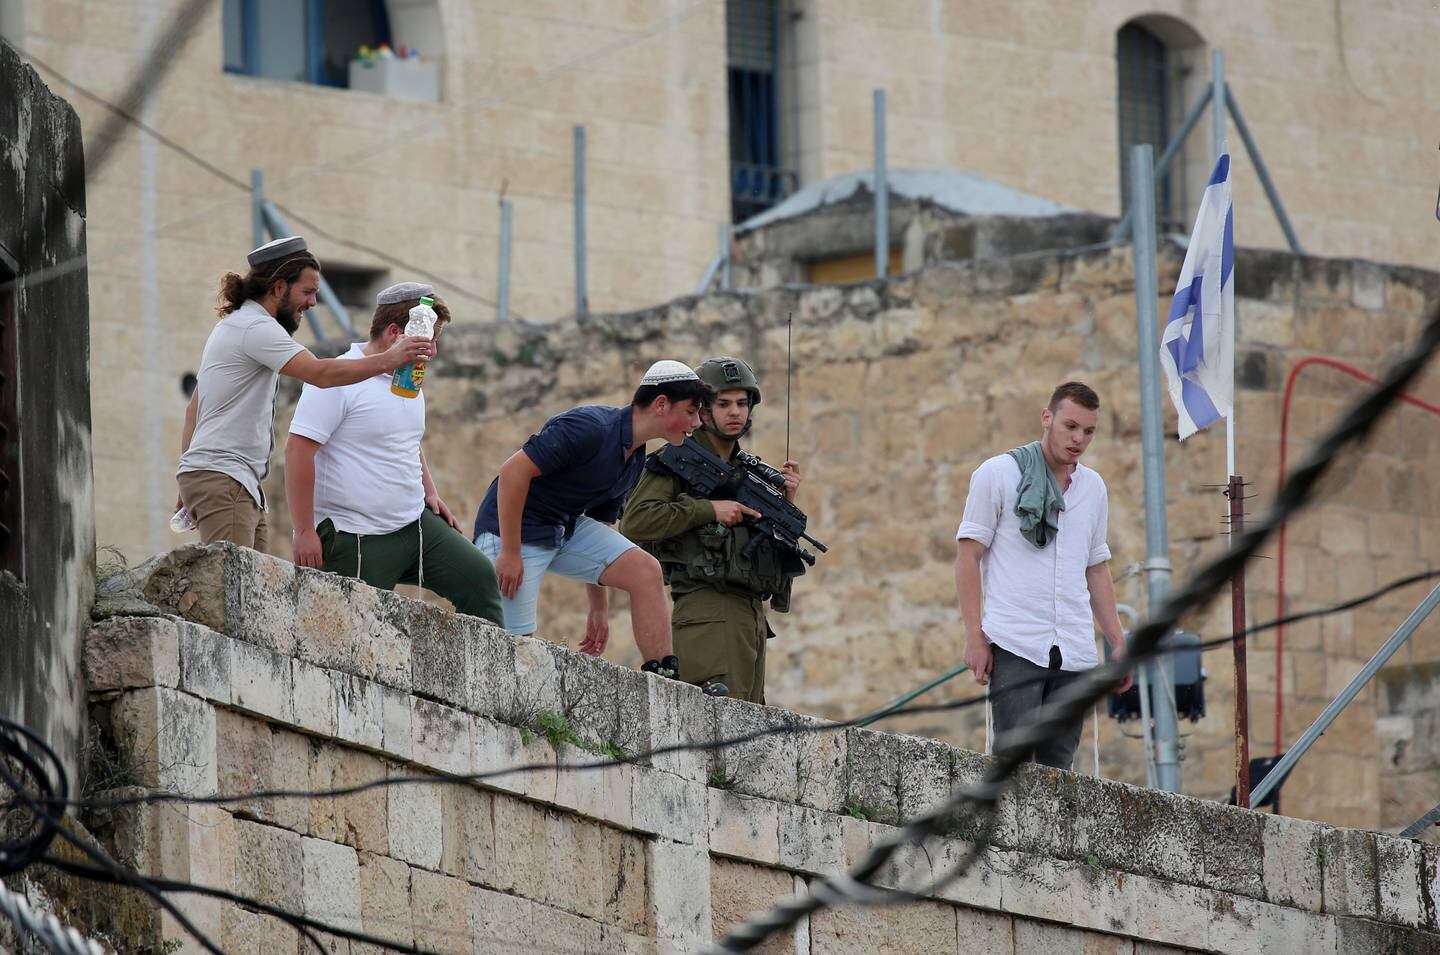 Jewish Israeli settlers watch Palestinian demonstrators in the Kasbah area of the Old City of Hebron in the West Bank, in April 2022. EPA